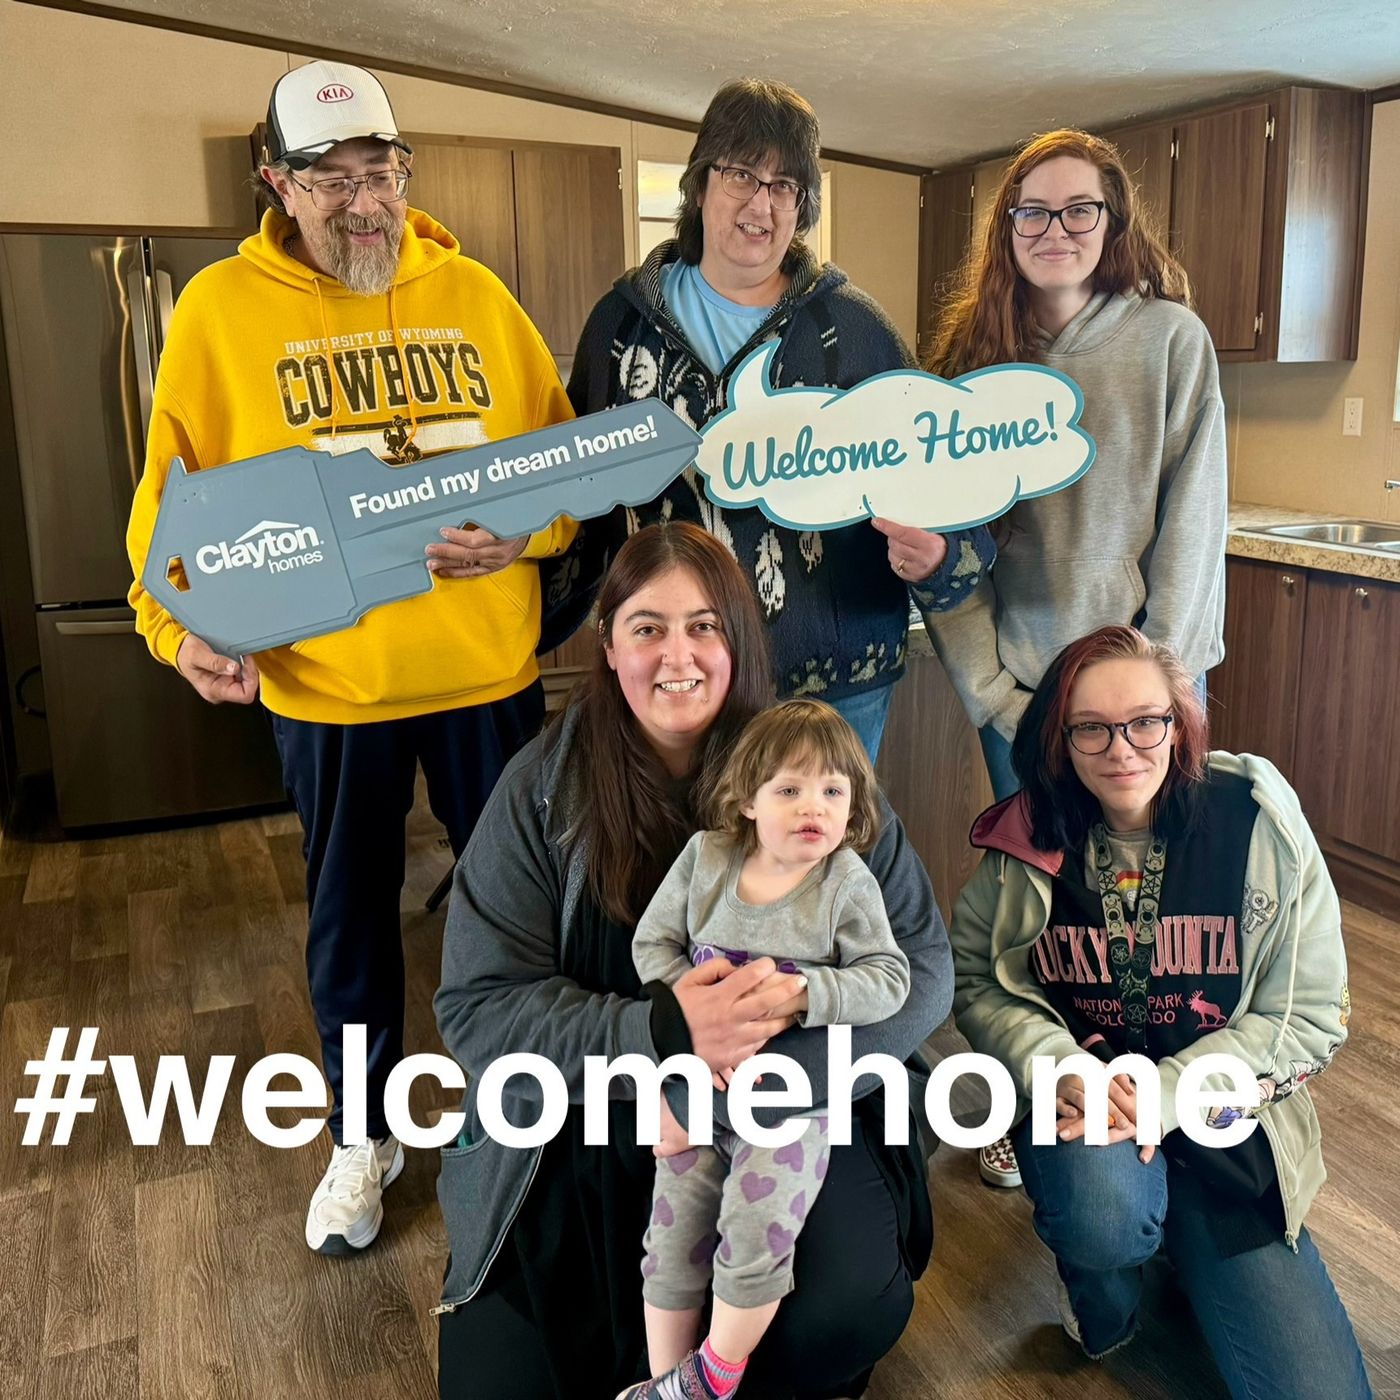 Frank L. welcome home image